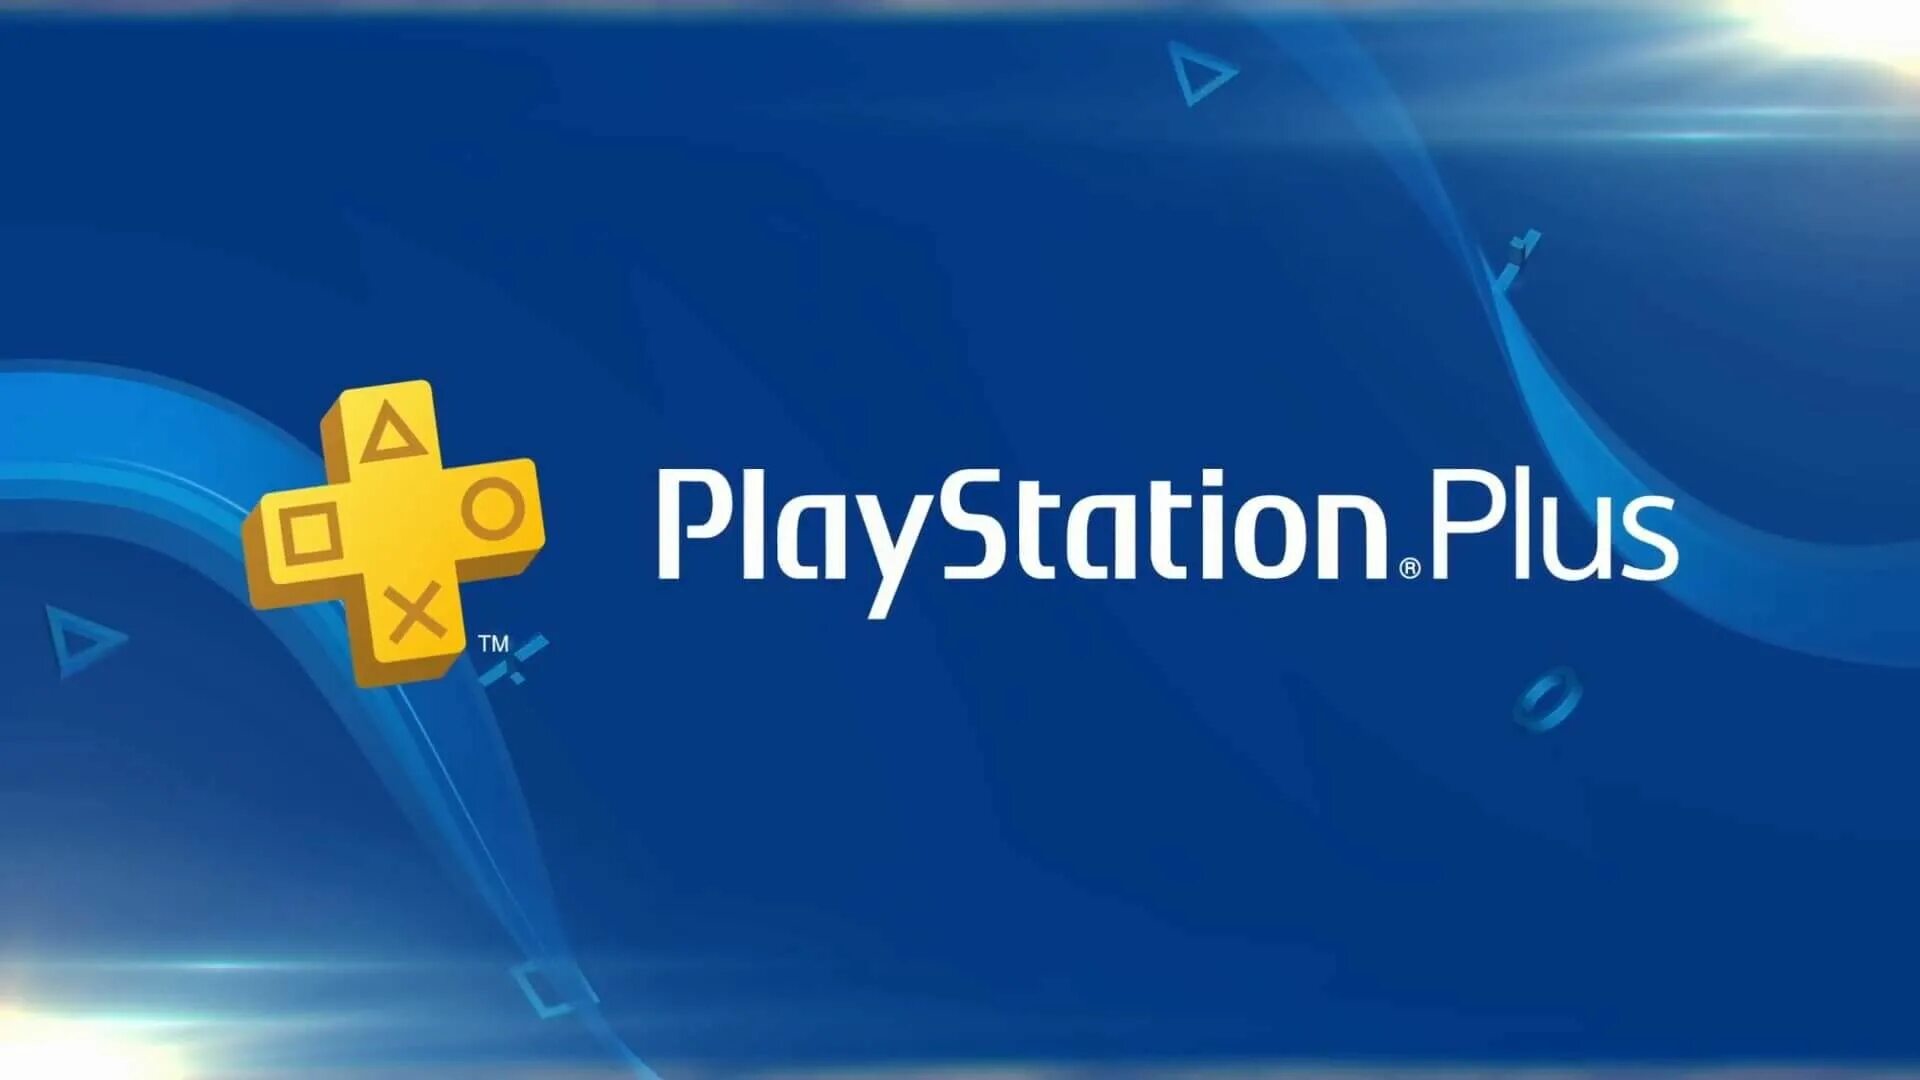 Playstation store turkey ps plus. Sony PS Plus. PLAYSTATION Plus Extra Essential Premium Deluxe. Sony PLAYSTATION Plus для ps4. PS Plus Essential Extra.